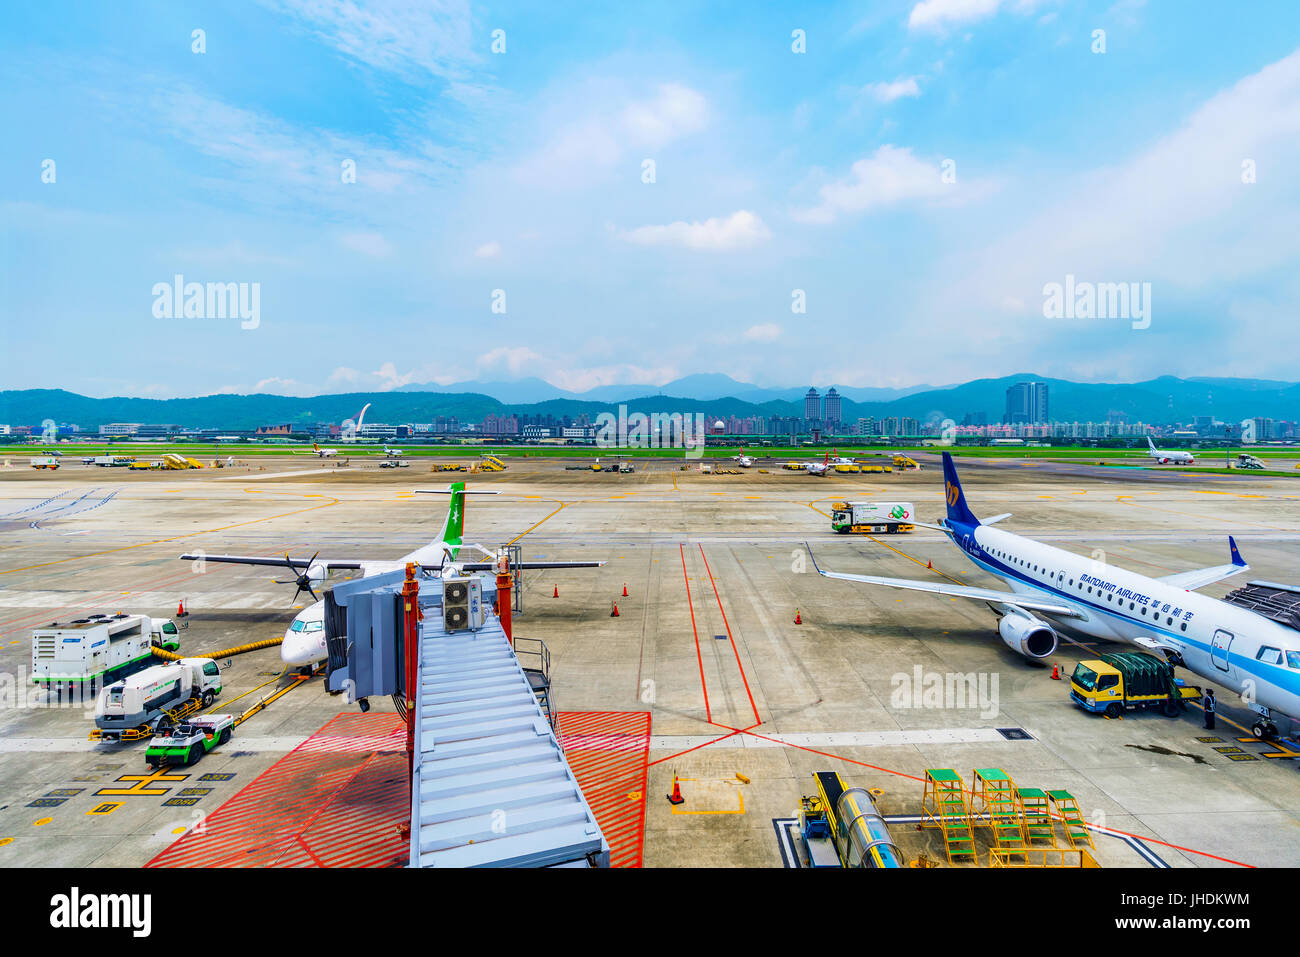 TAIPEI, TAIWAN - JUNE 09: This is a view of the runway of Songshan airport with airplanes getting ready to board passengers on June 09, 2017 in Taipei Stock Photo